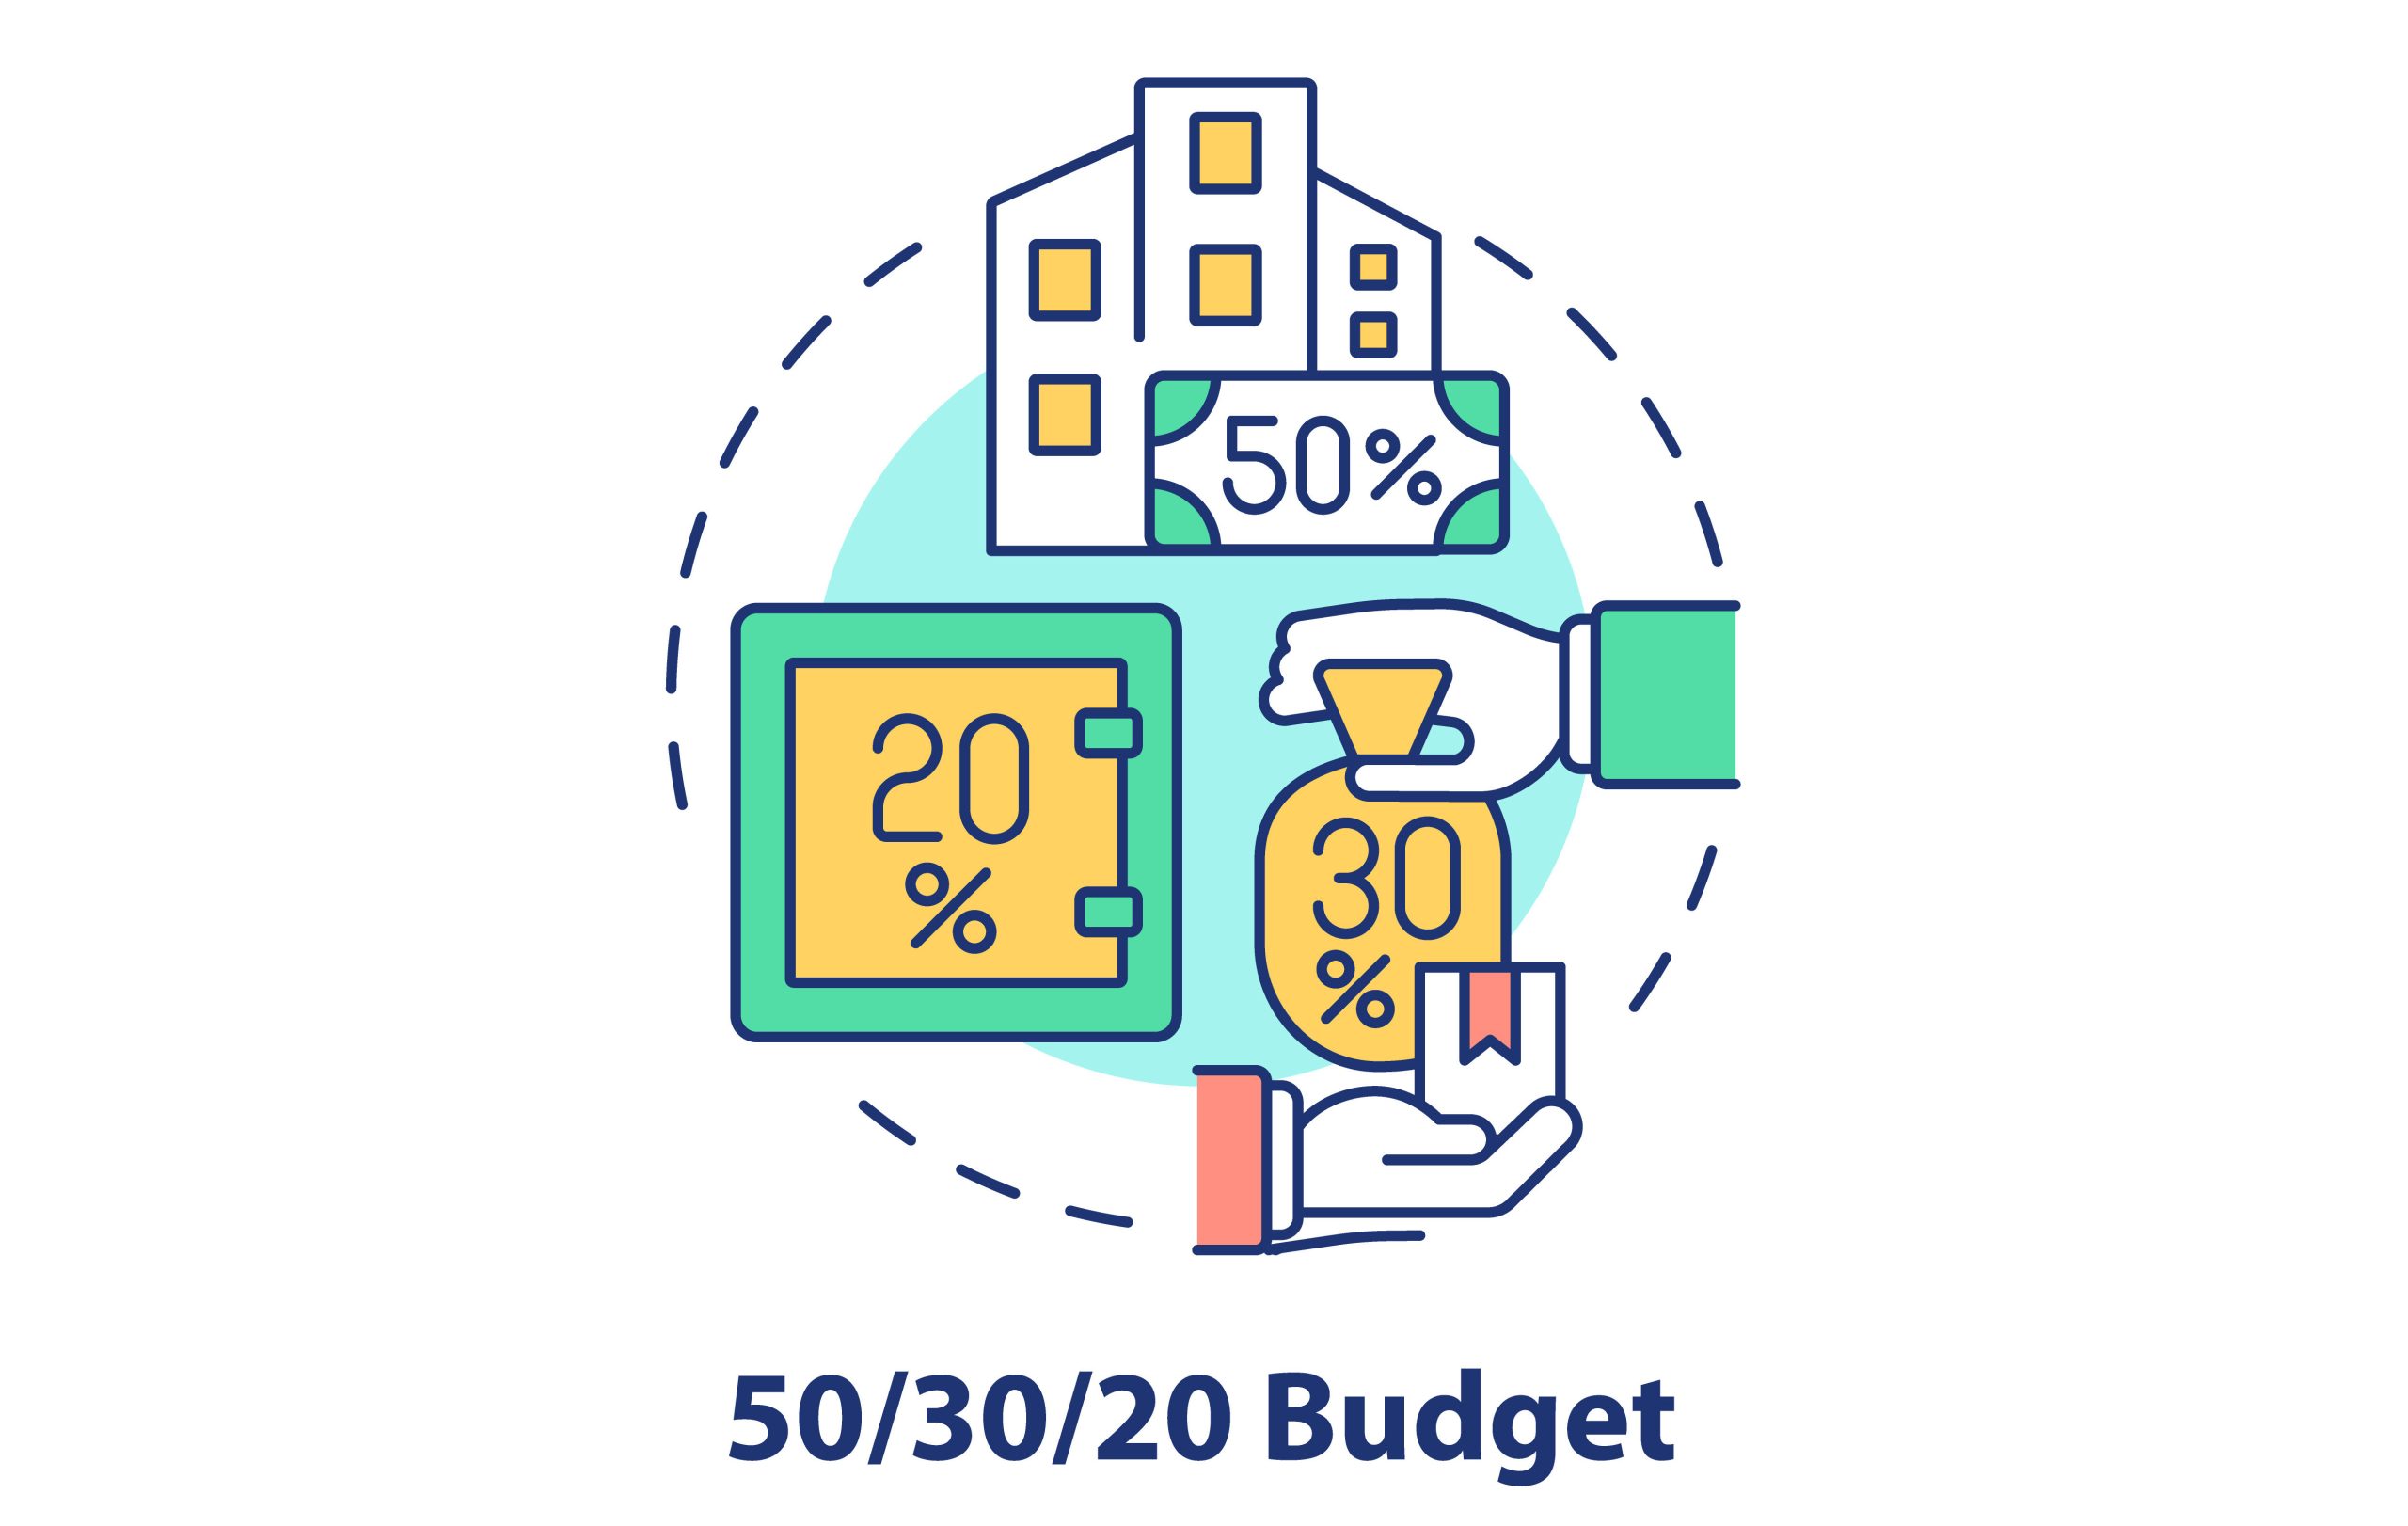 50 30 20 budget with proportion displaying basic logos like 50% in household spending, 20% saved in a safe and 30% in other spending